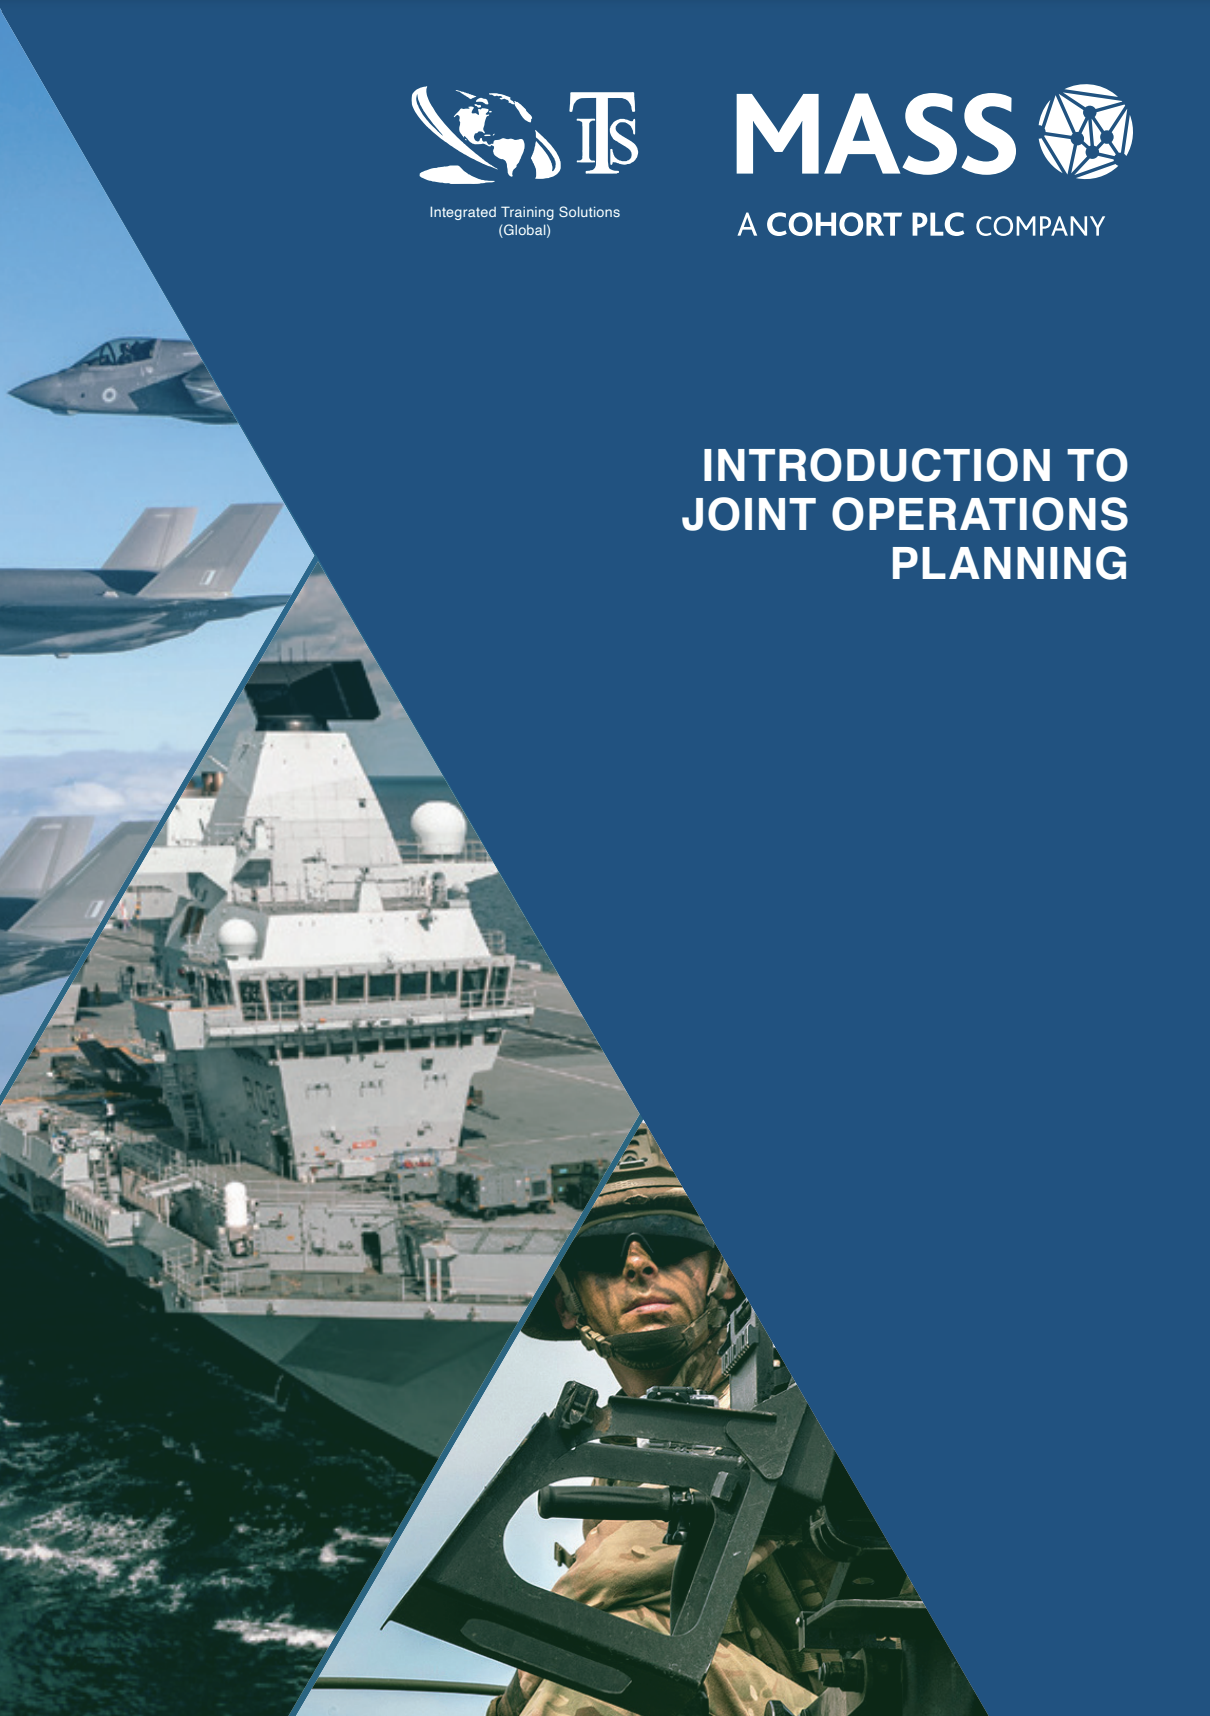 Operations planning brochure cover